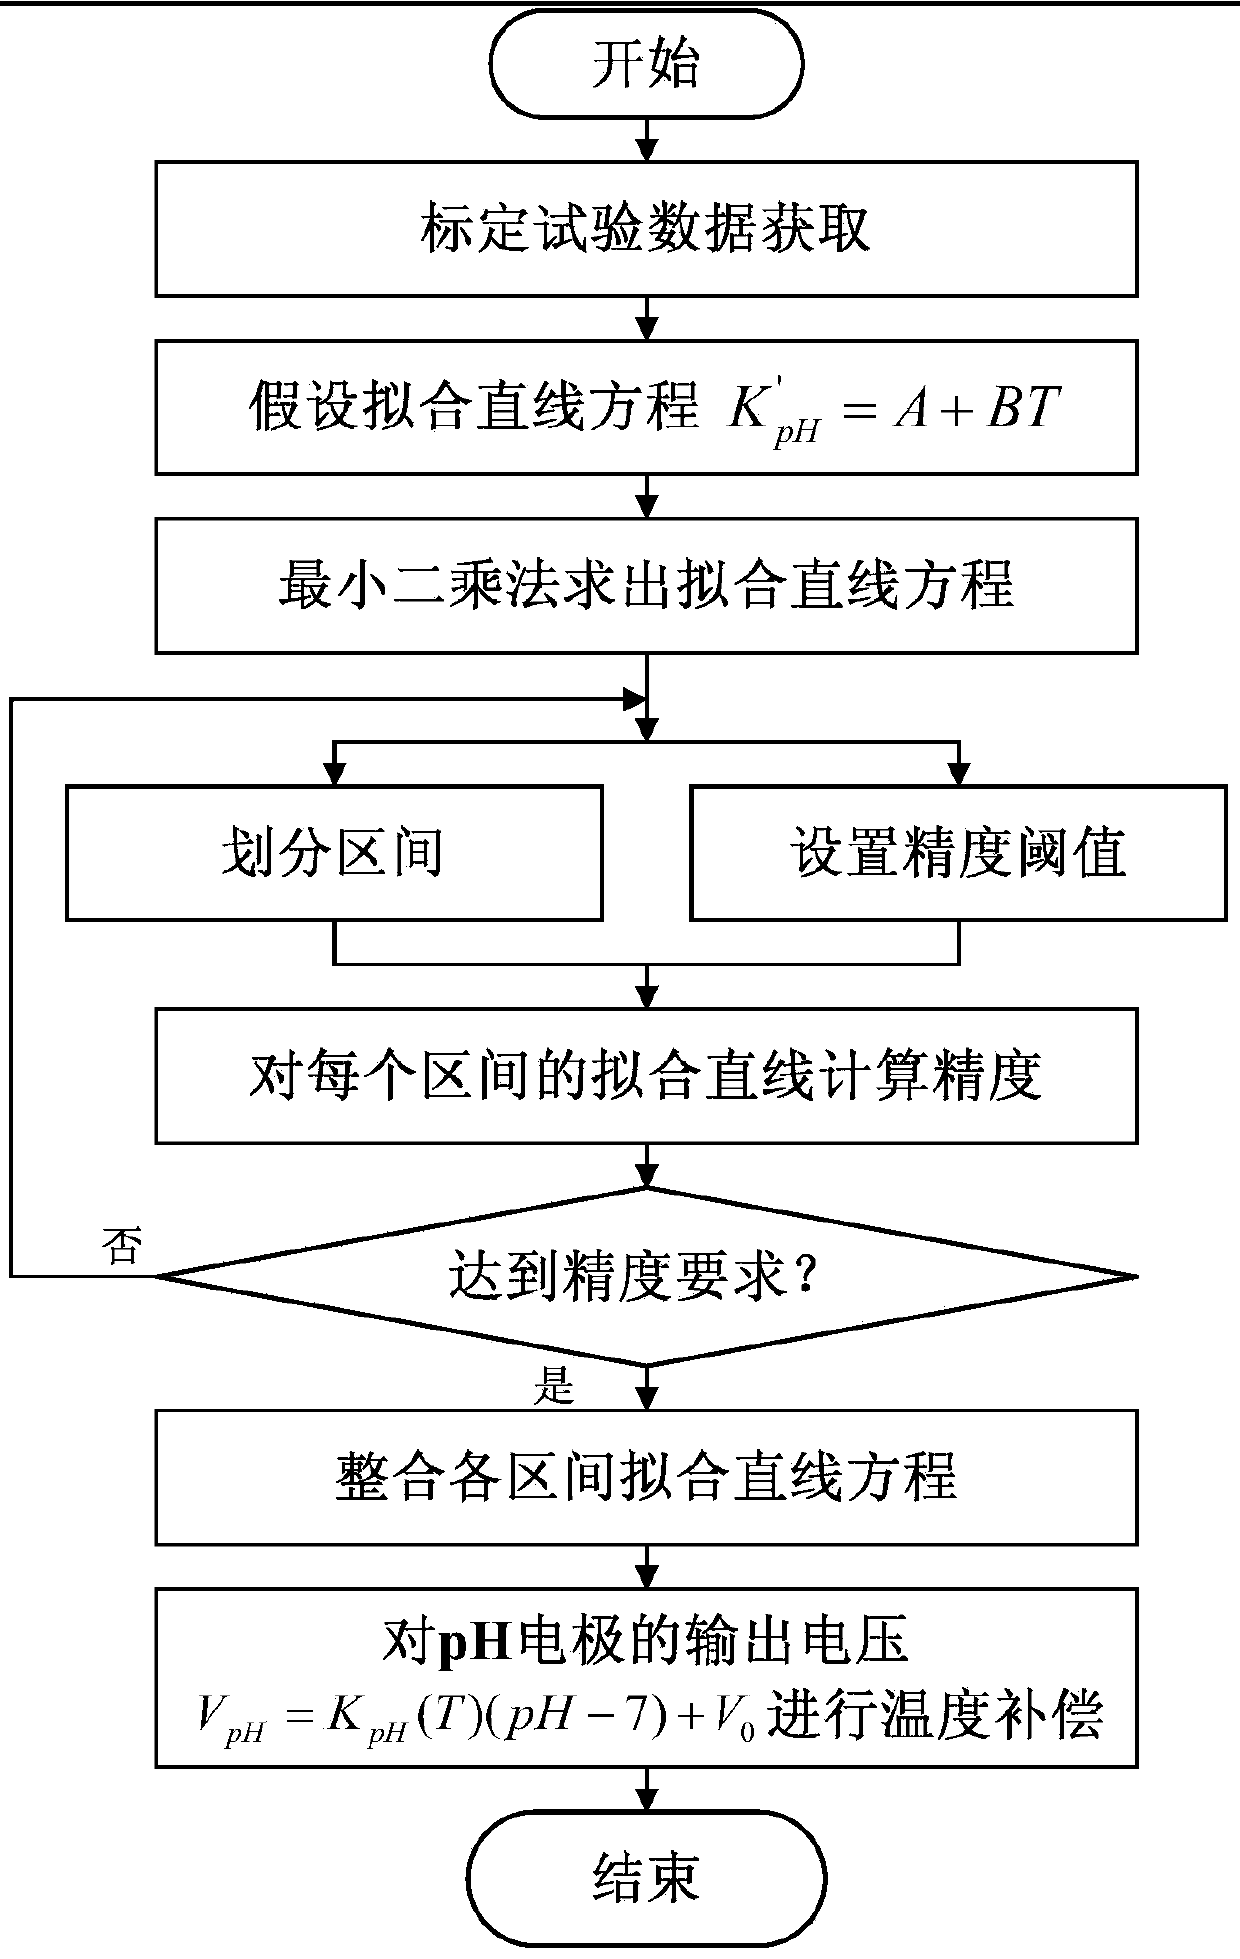 Small-signal sectional fitting temperature compensation method of water quality sensor